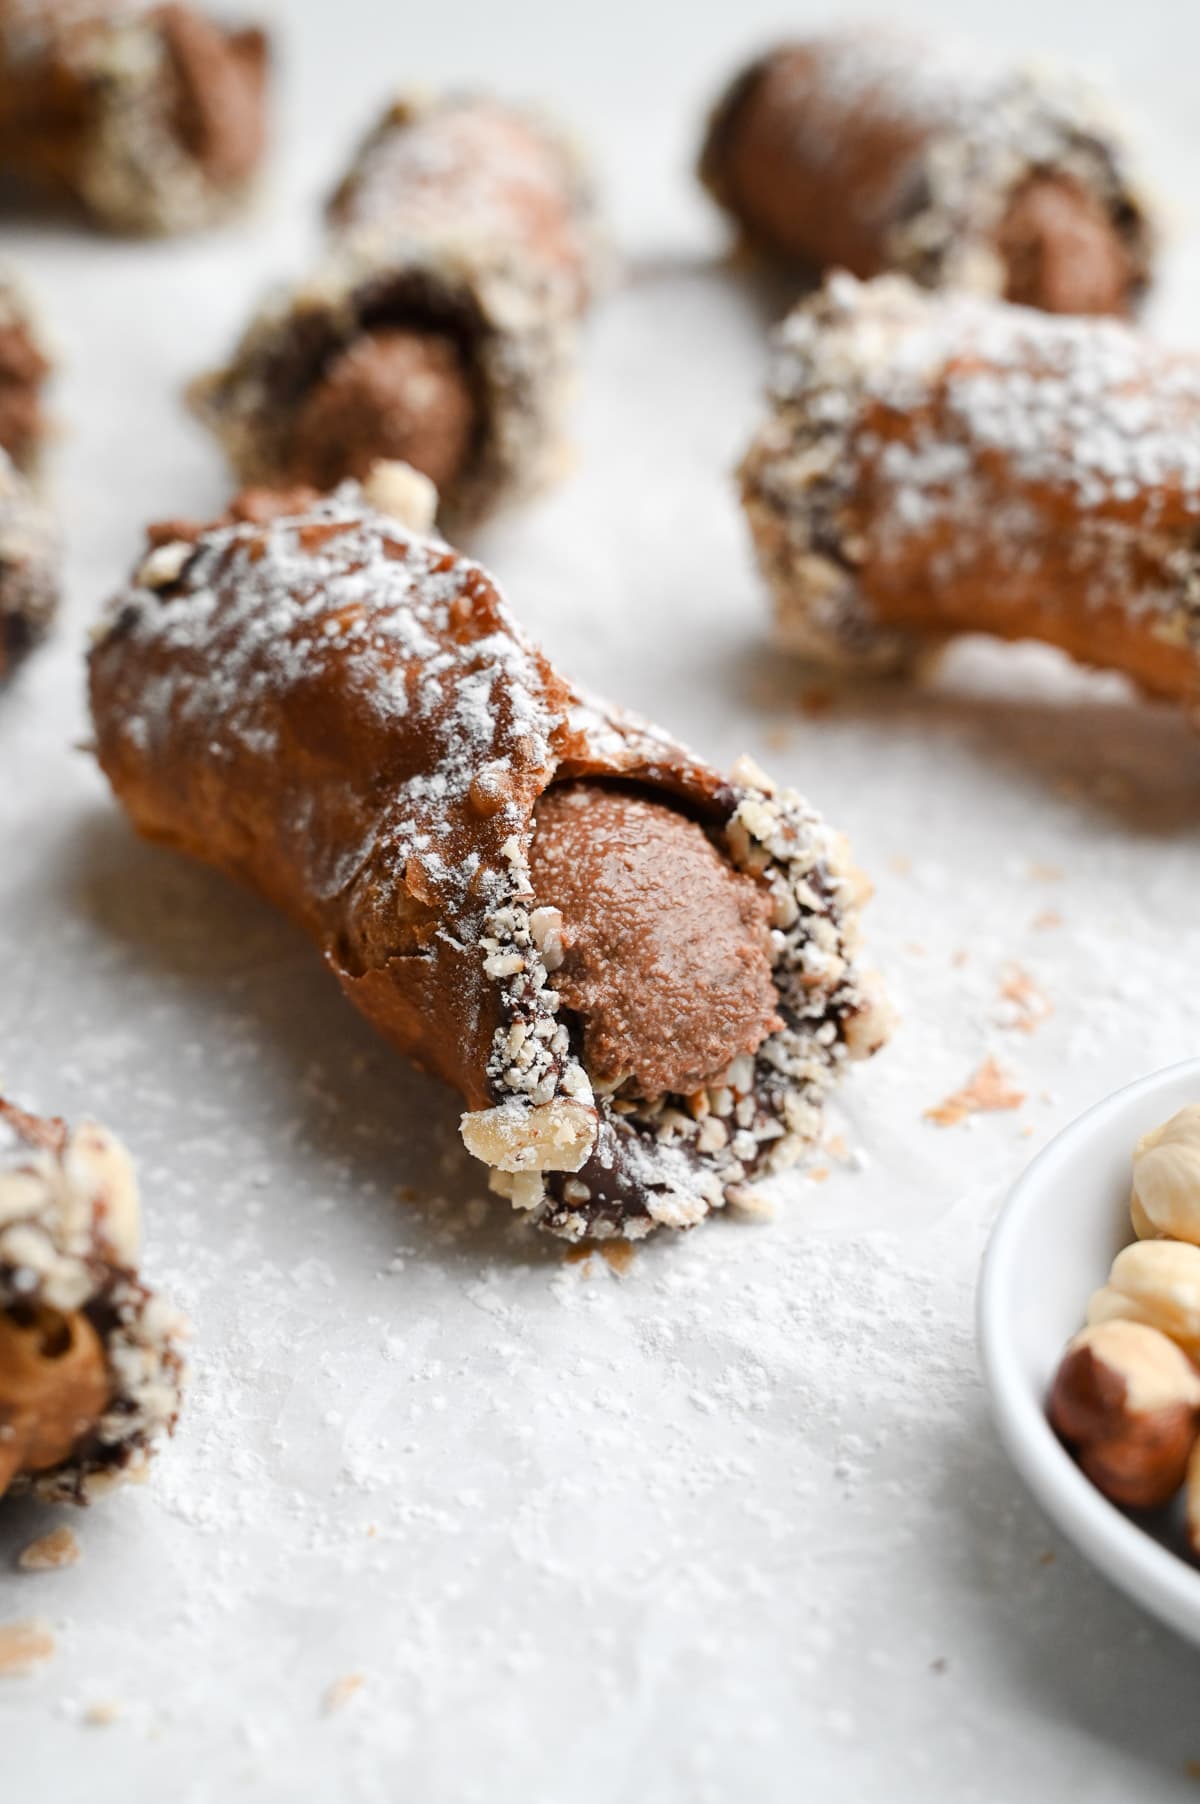 Close up of a group of Nutella cannoli dipped in chocolate and hazelnuts on parchment paper.